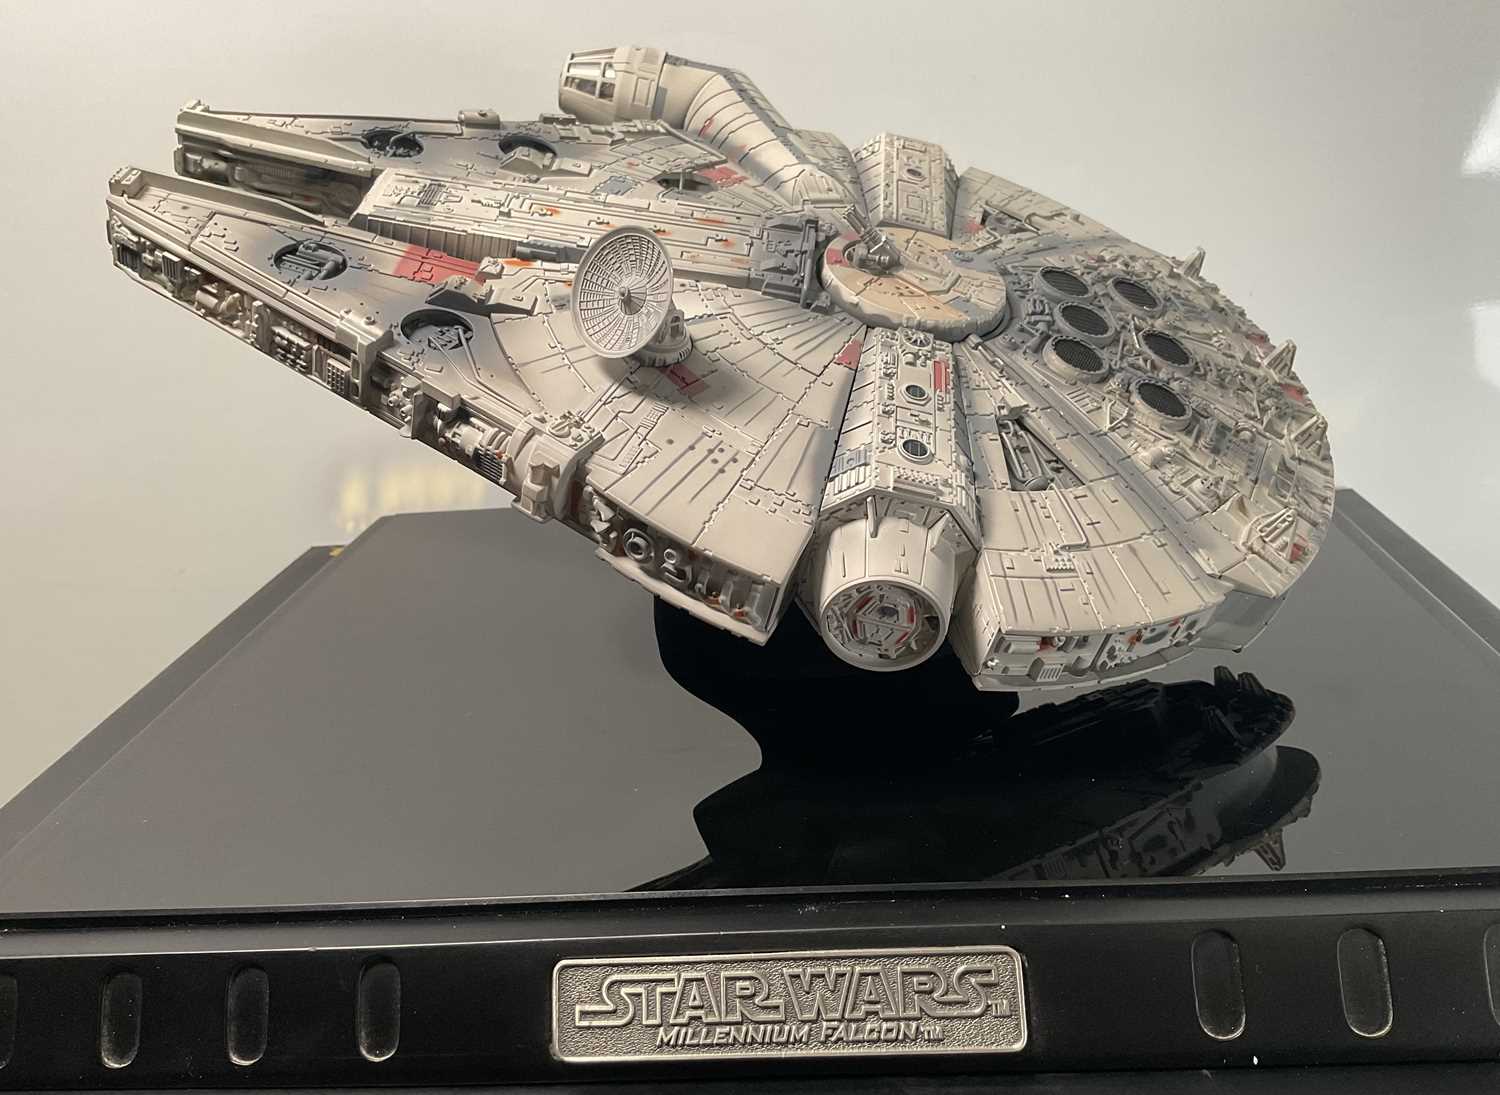 STAR WARS - A Code 3 Die Cast, hand-painted replica of the Millennium Falcon scale, limited - Image 5 of 12